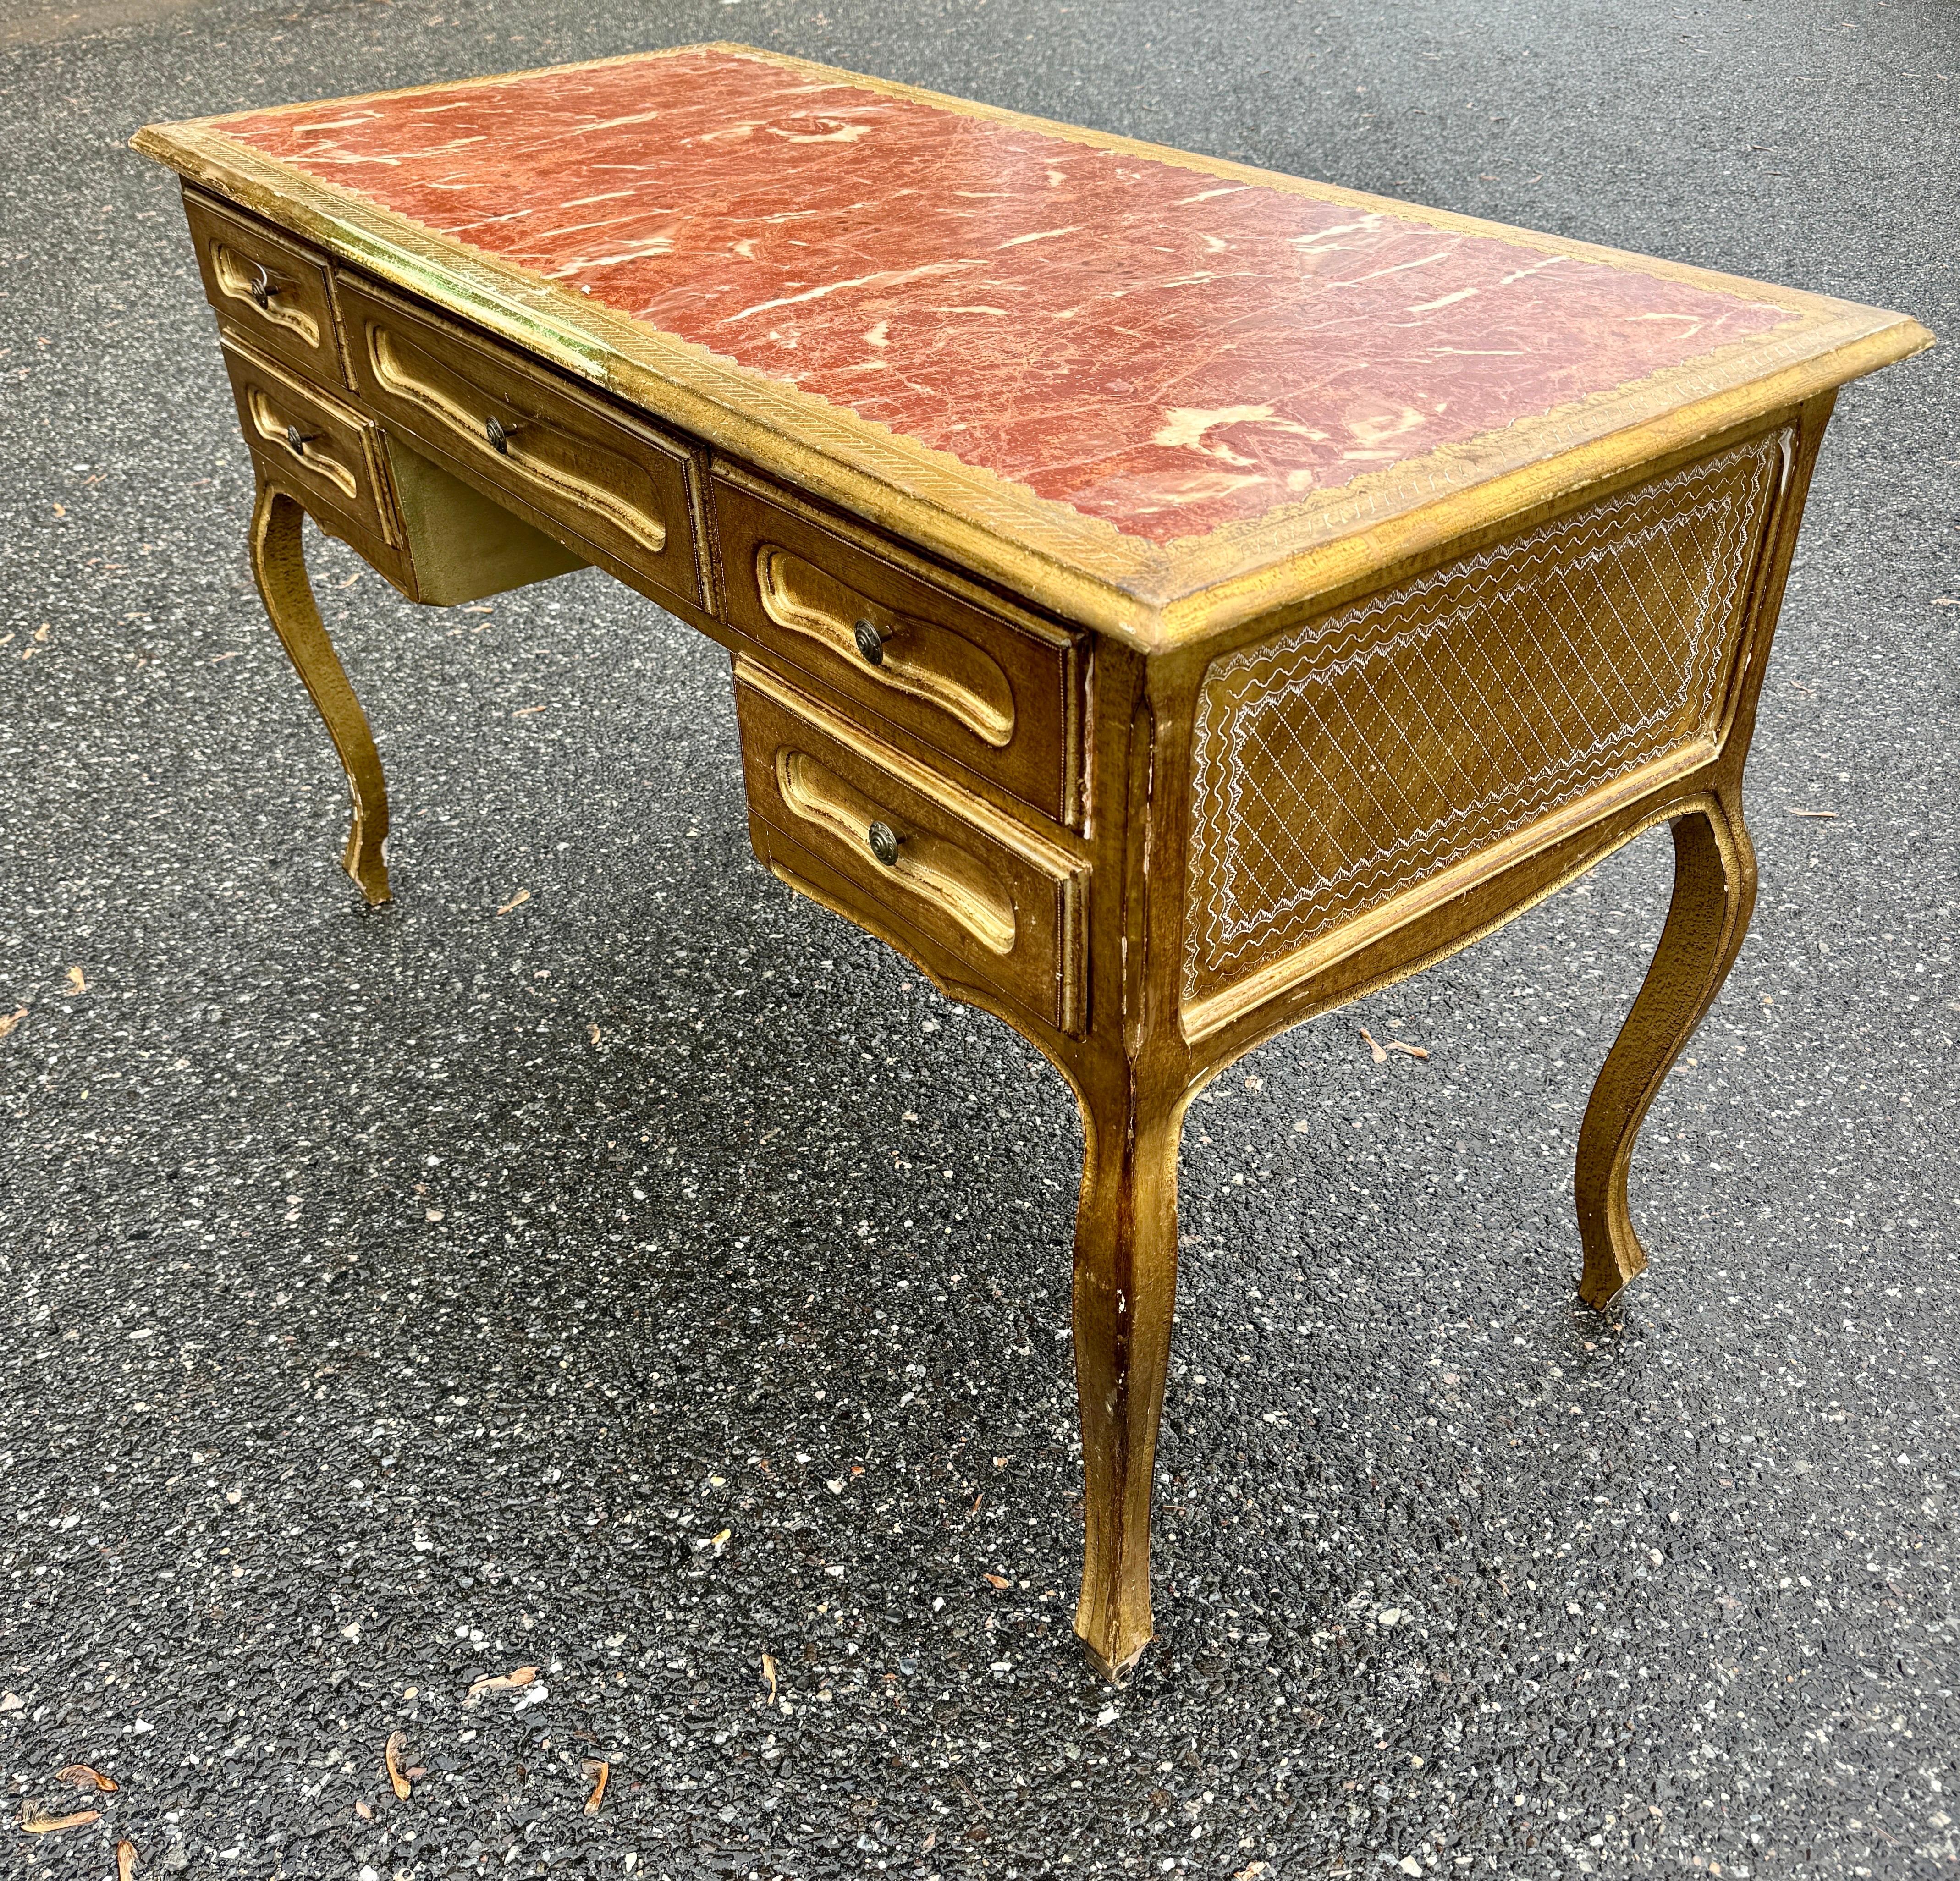 Italian Mid-Century Florentine Gilt Desk with Drawers In Good Condition For Sale In Haddonfield, NJ